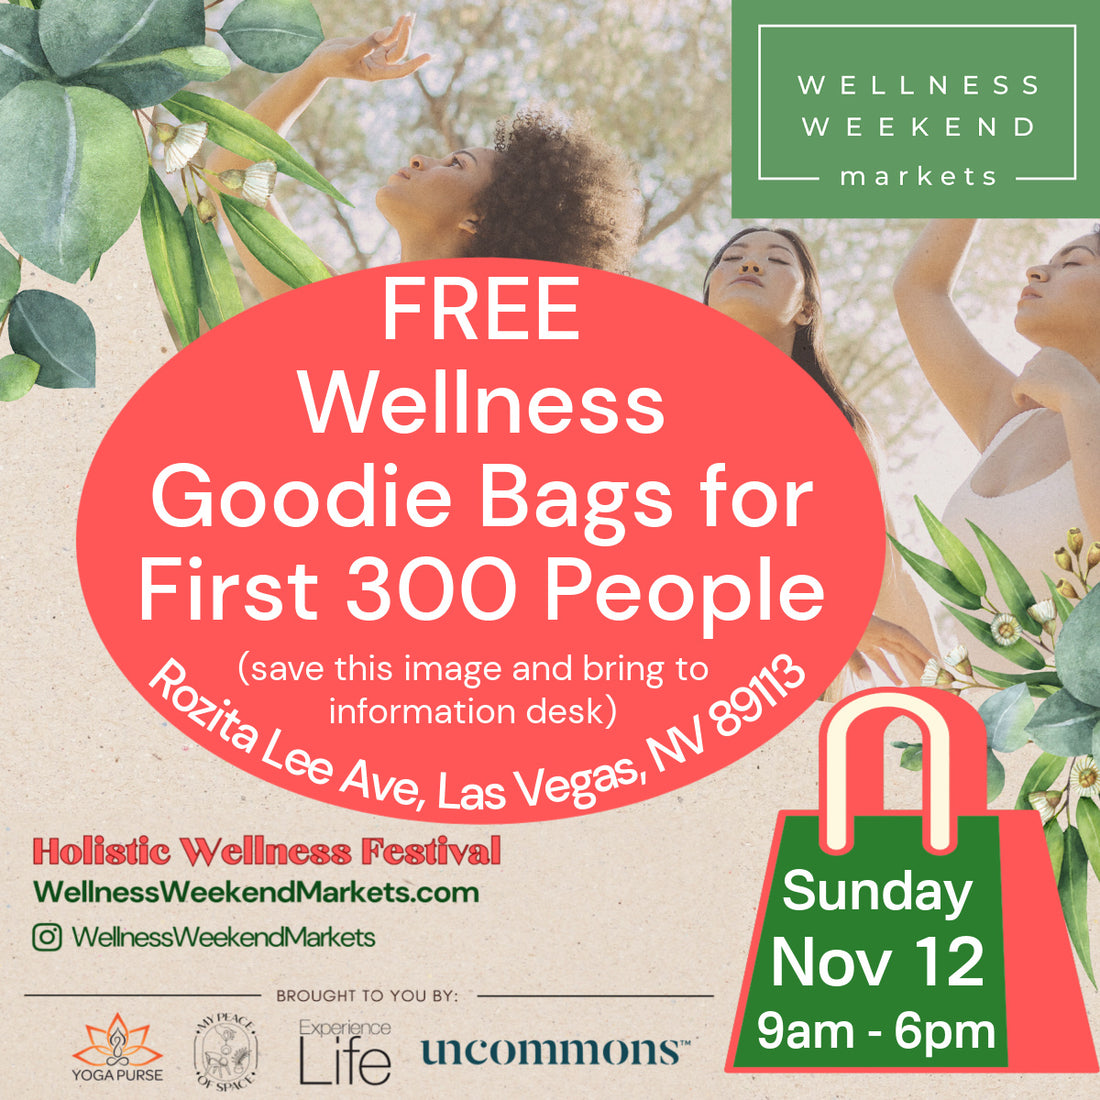 FREE Wellness Goodie Bags for the first 300 People to visit the vendor village